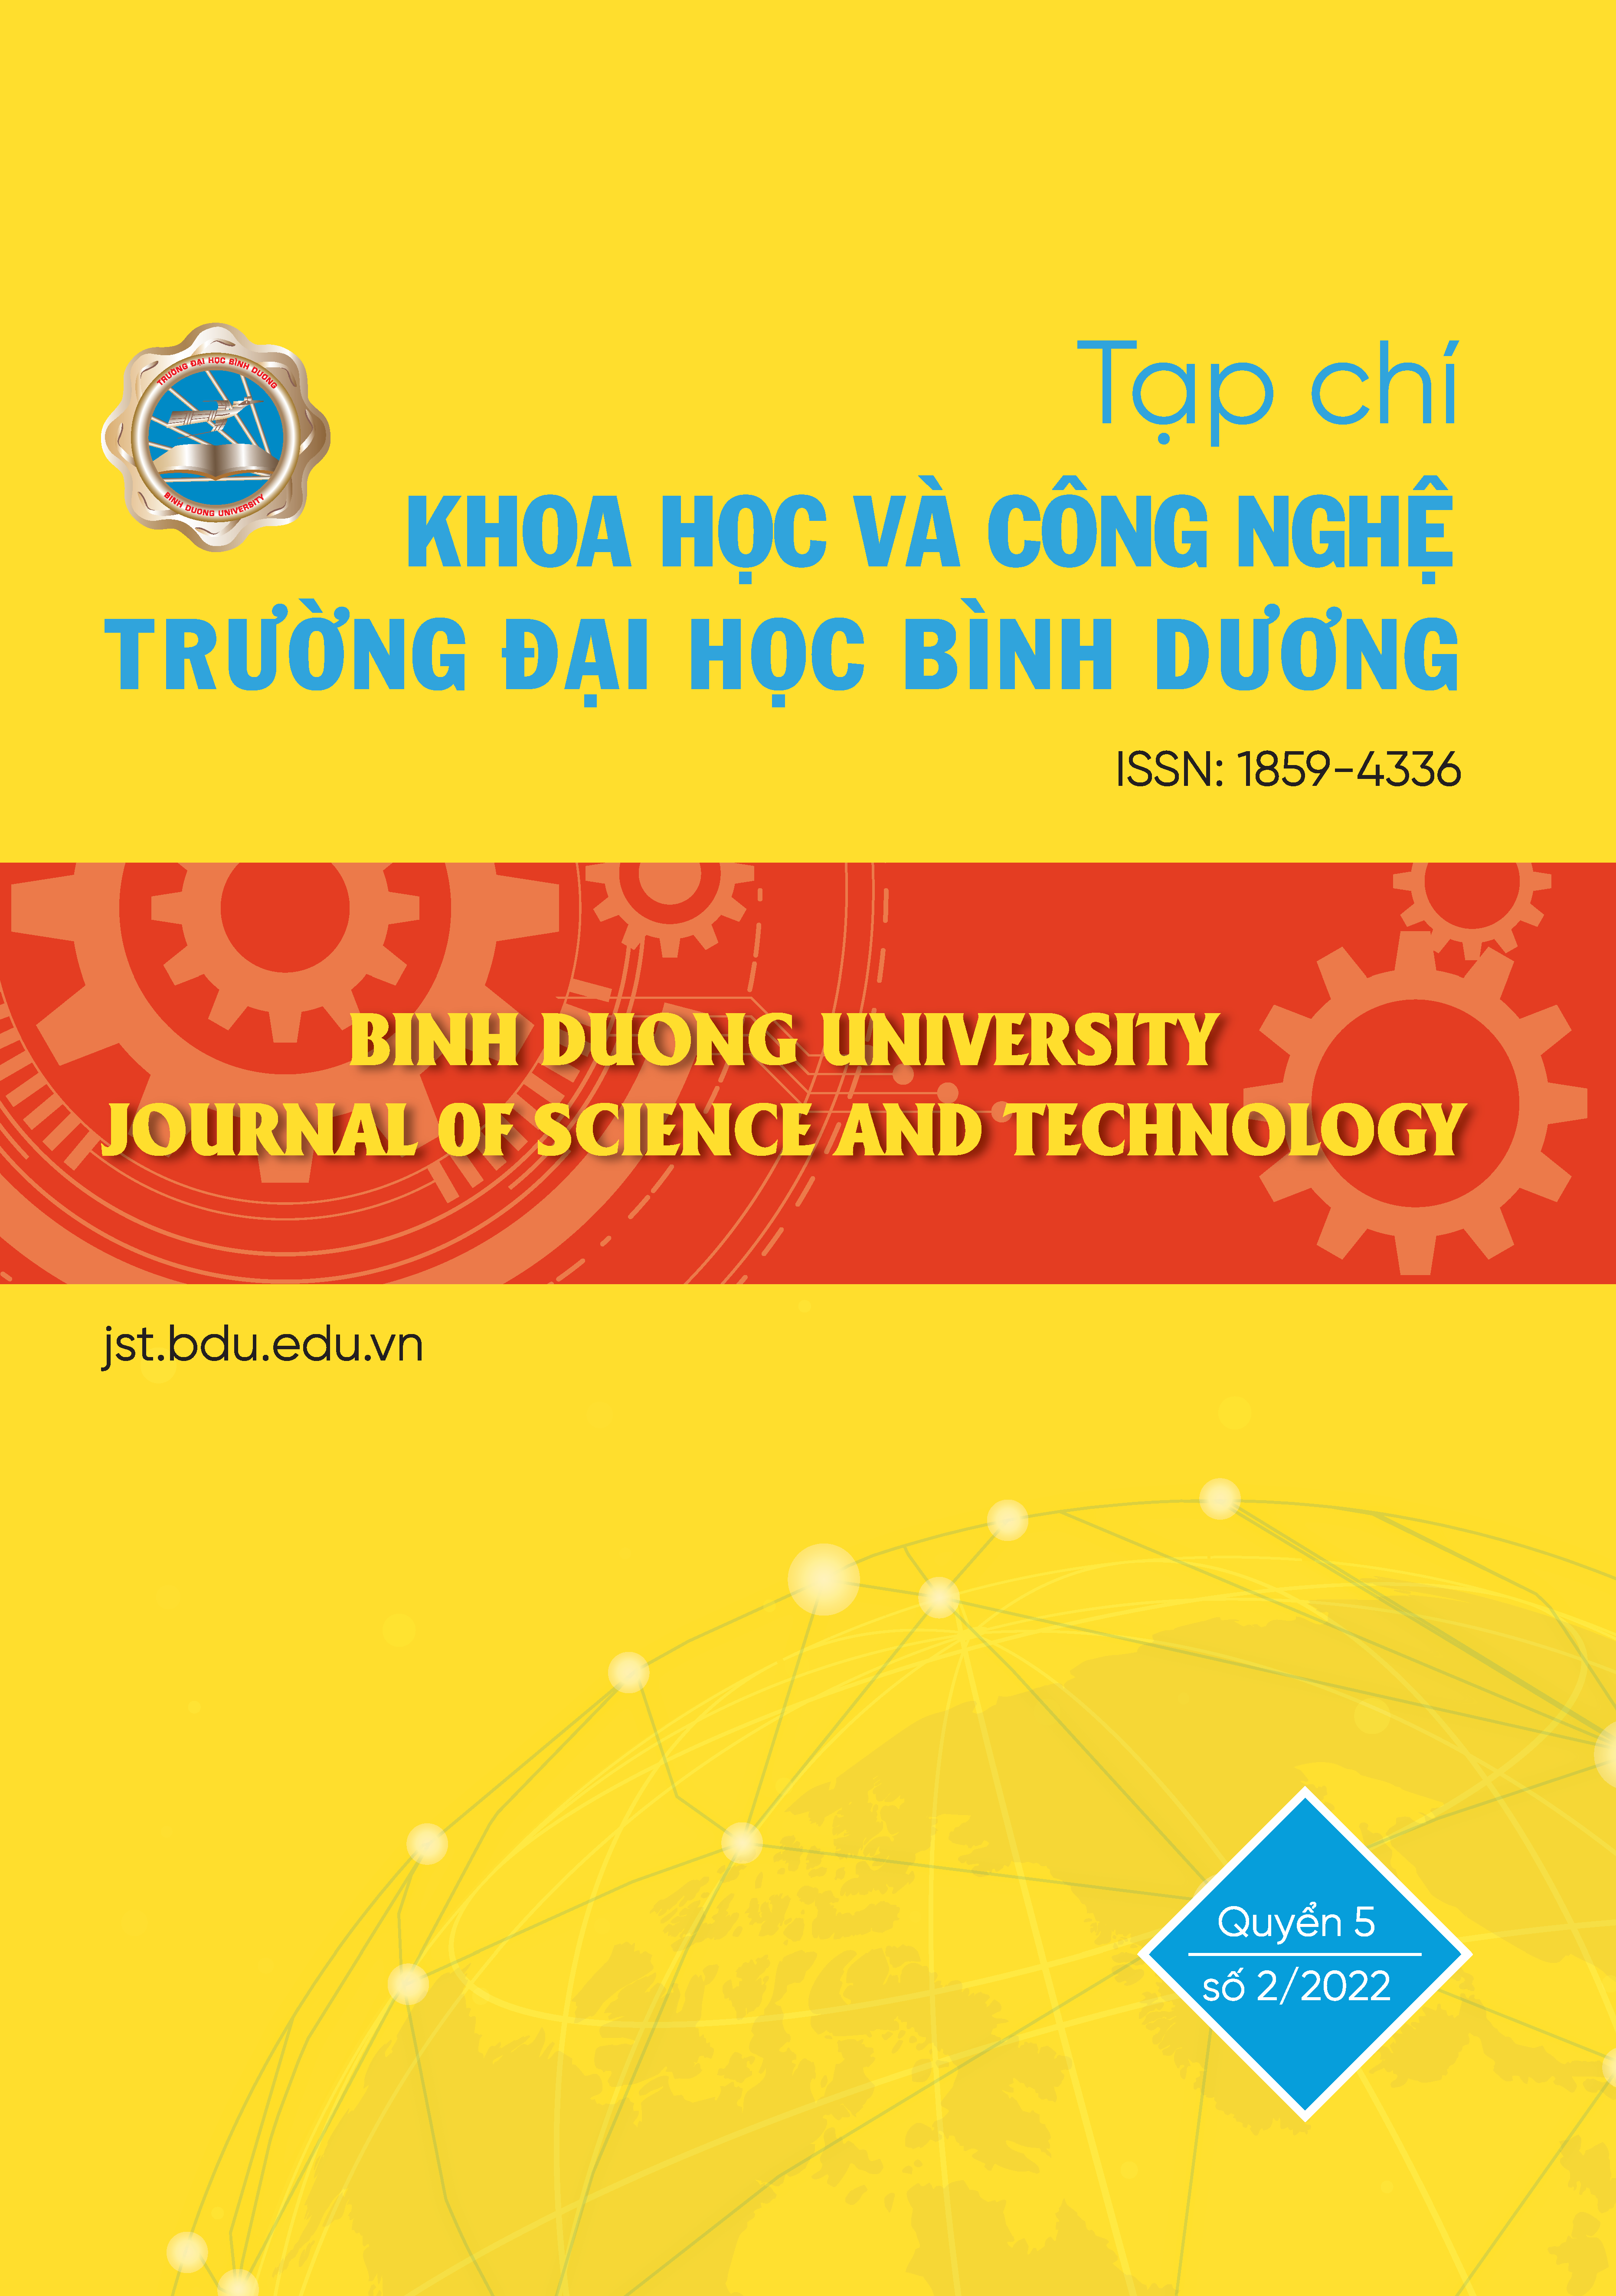 					View Vol. 5 No. 2 (2022): BINH DUONG UNIVERSITY JOURNAL OF SCIENCE AND TECHNOLOGY
				